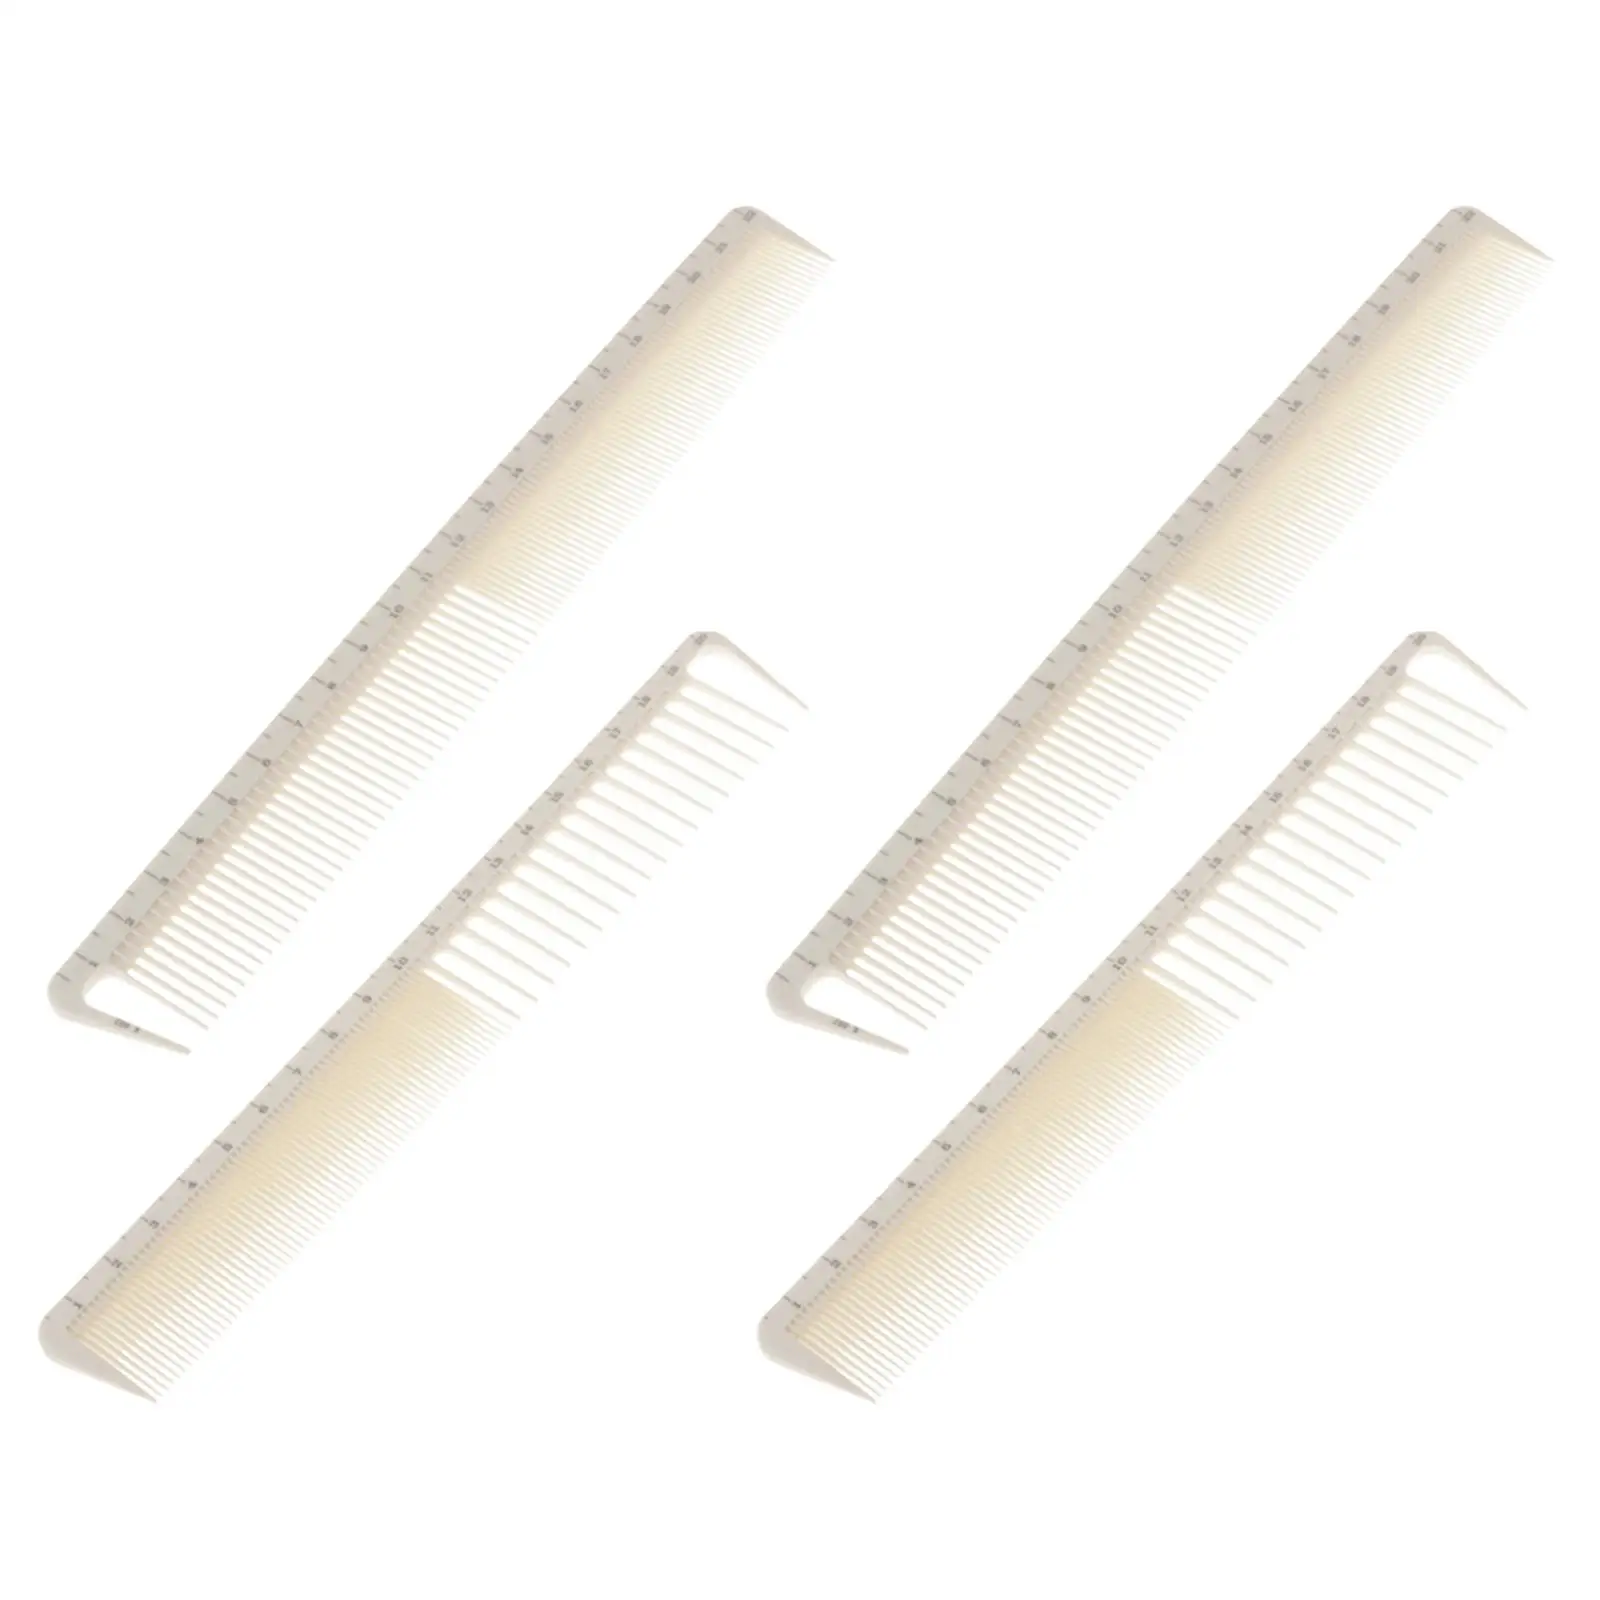 4x Professional Salon Barber Hairdressing Resin Comb Hair Comb with Scales